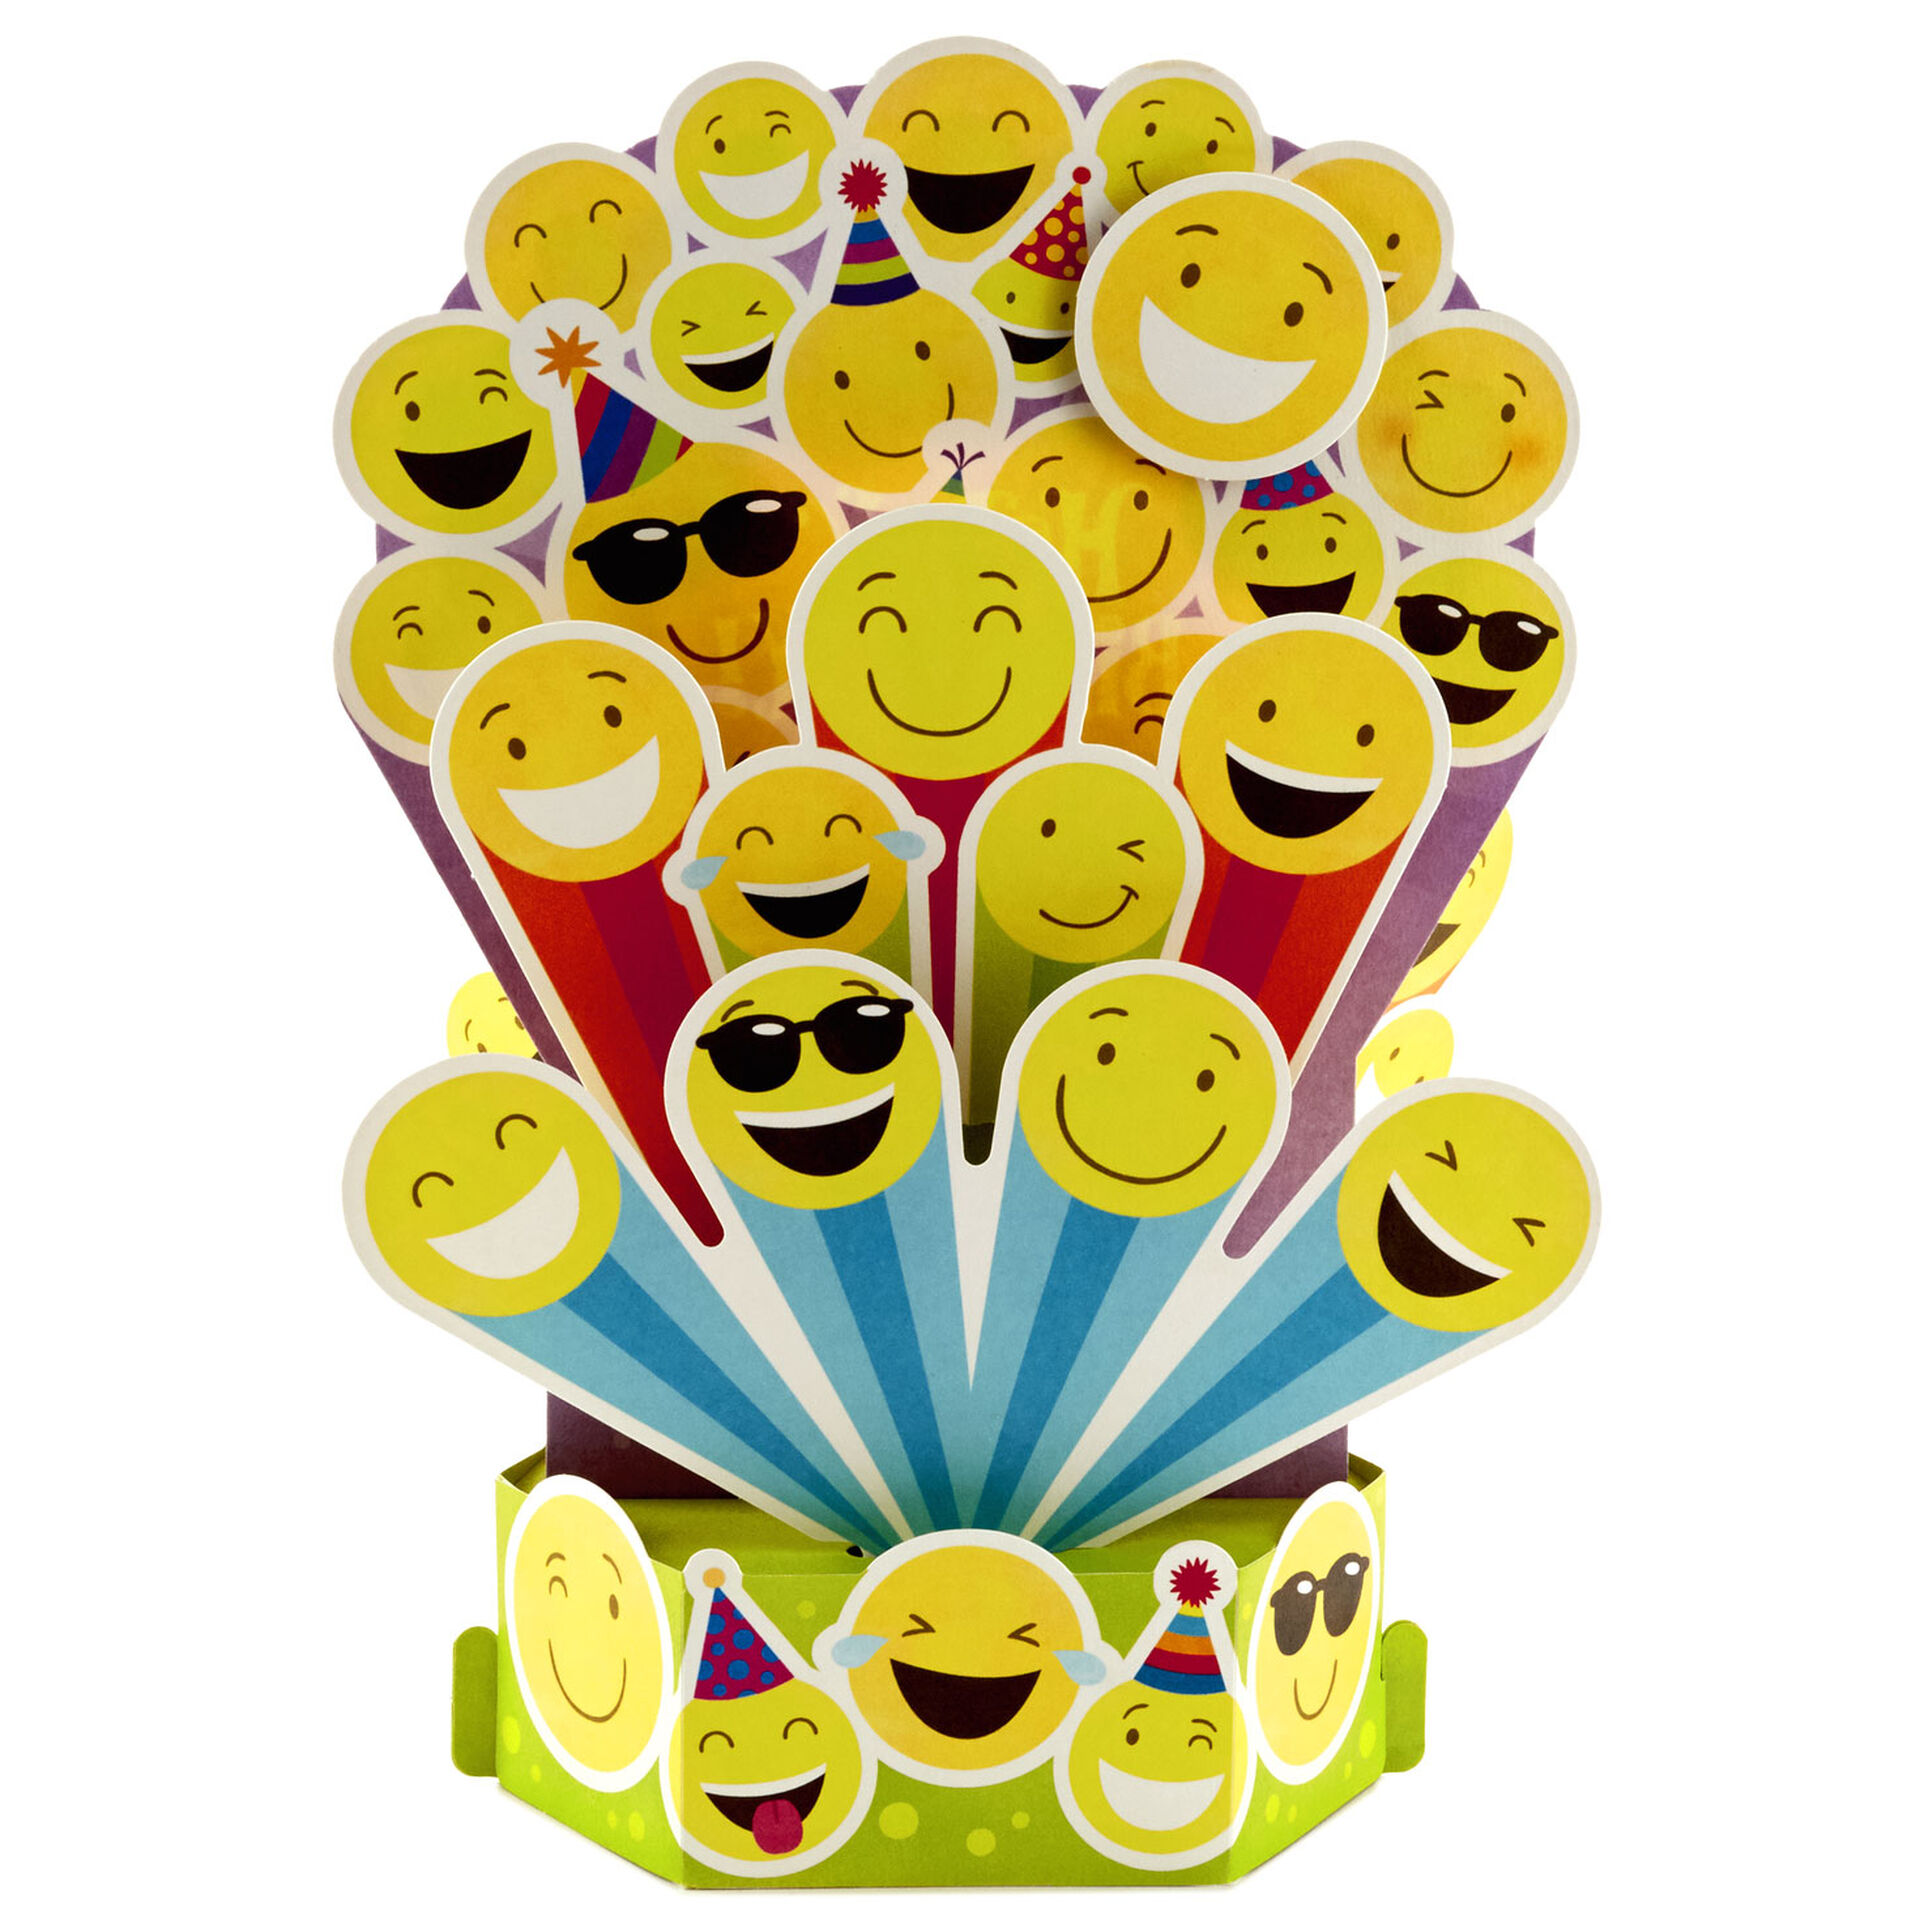 Happy Emojis 3D Pop-Up Musical Birthday Card With Light - Greeting